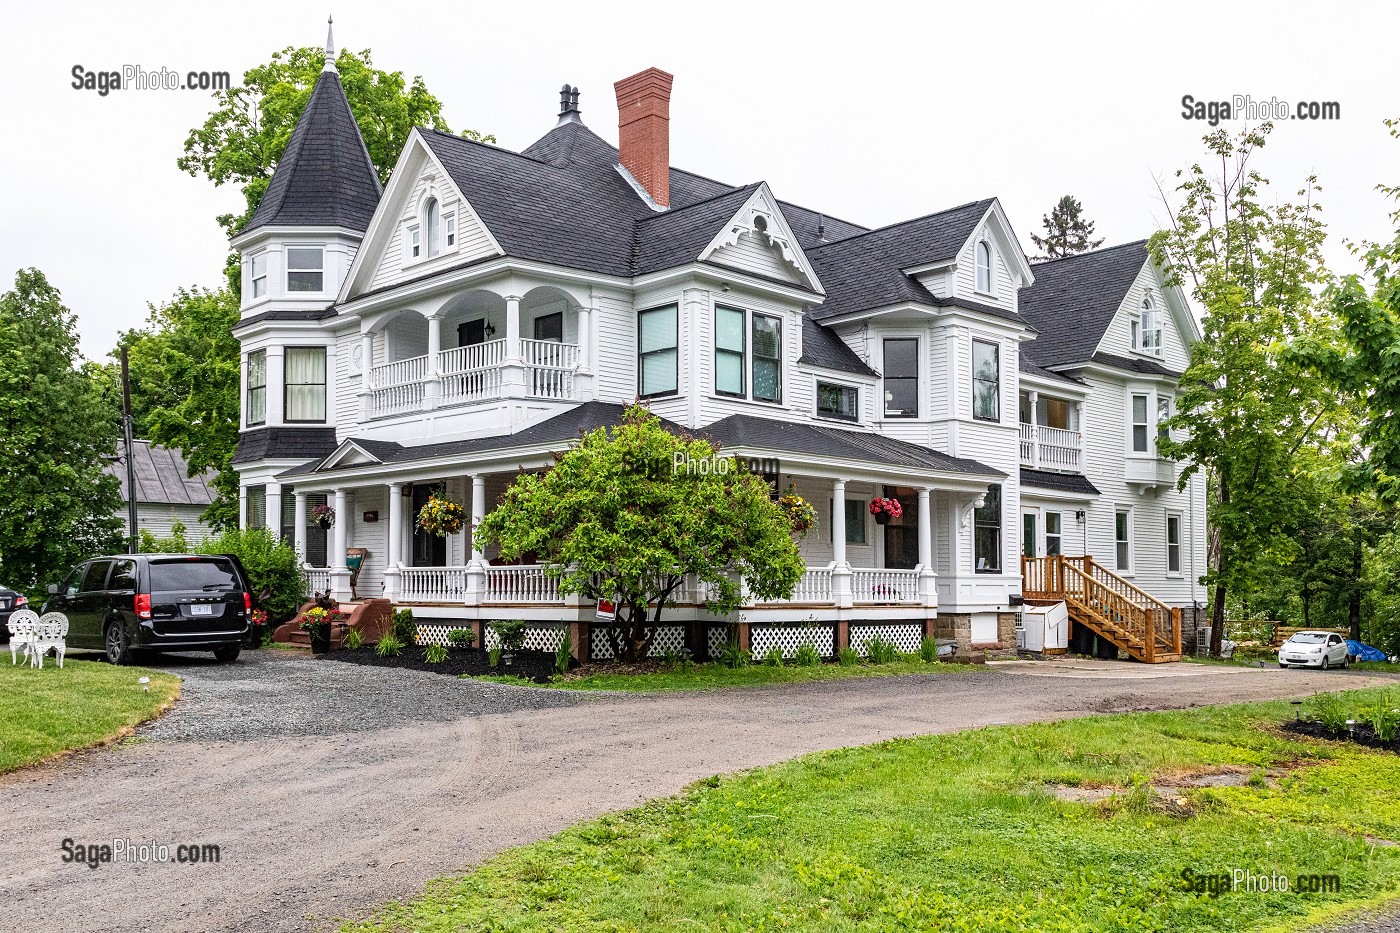 BED AND BREAKFAST, BY THE RIVER, FREDERICTON, NOUVEAU BRUNSWICK, CANADA, AMERIQUE DU NORD 